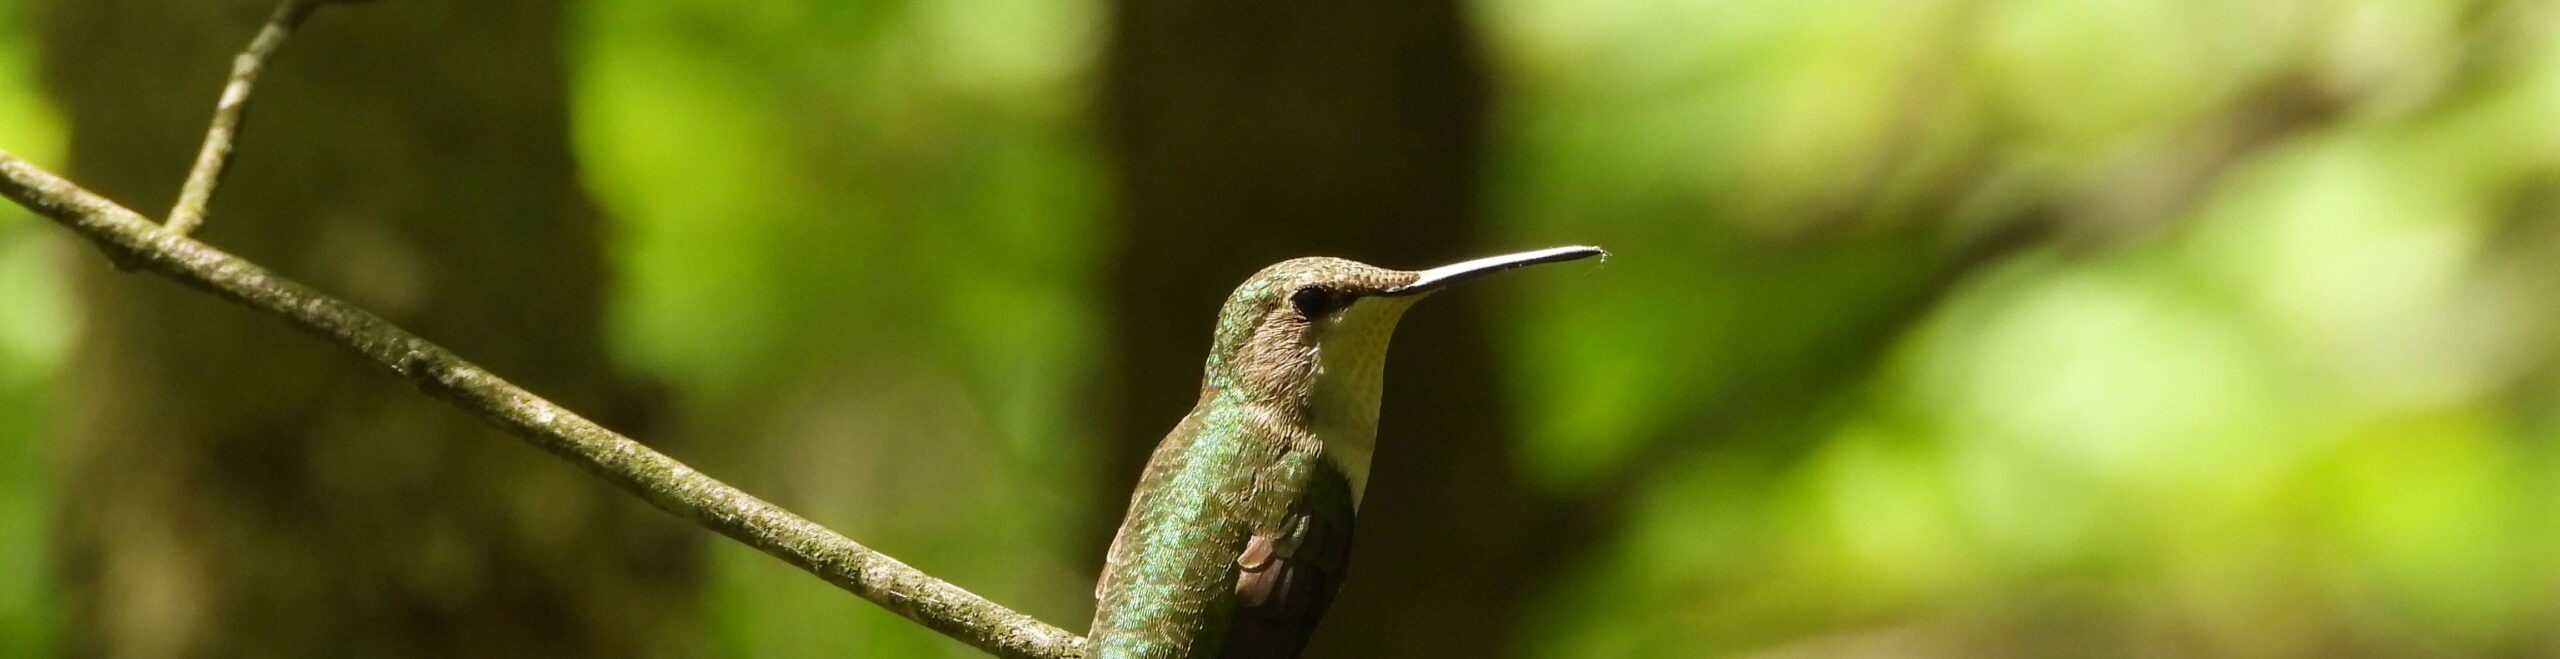 Ruby-throated Hummingbird perched on branch